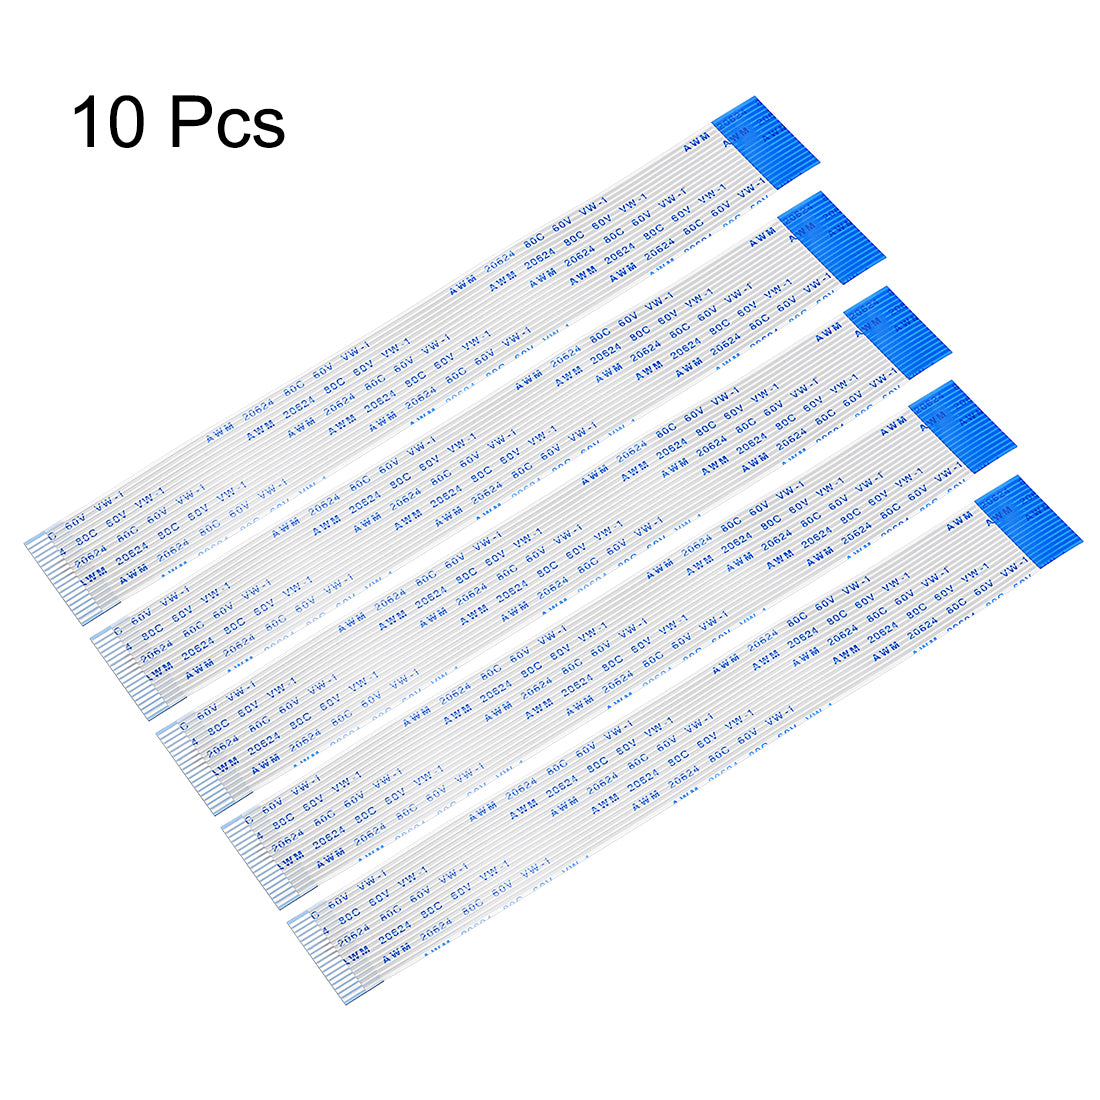 Uxcell Uxcell Flexible Flat Cable 150mm 1mm Pitch 26 Pins FPC FFC Flexible Ribbon Cable 10Pcs